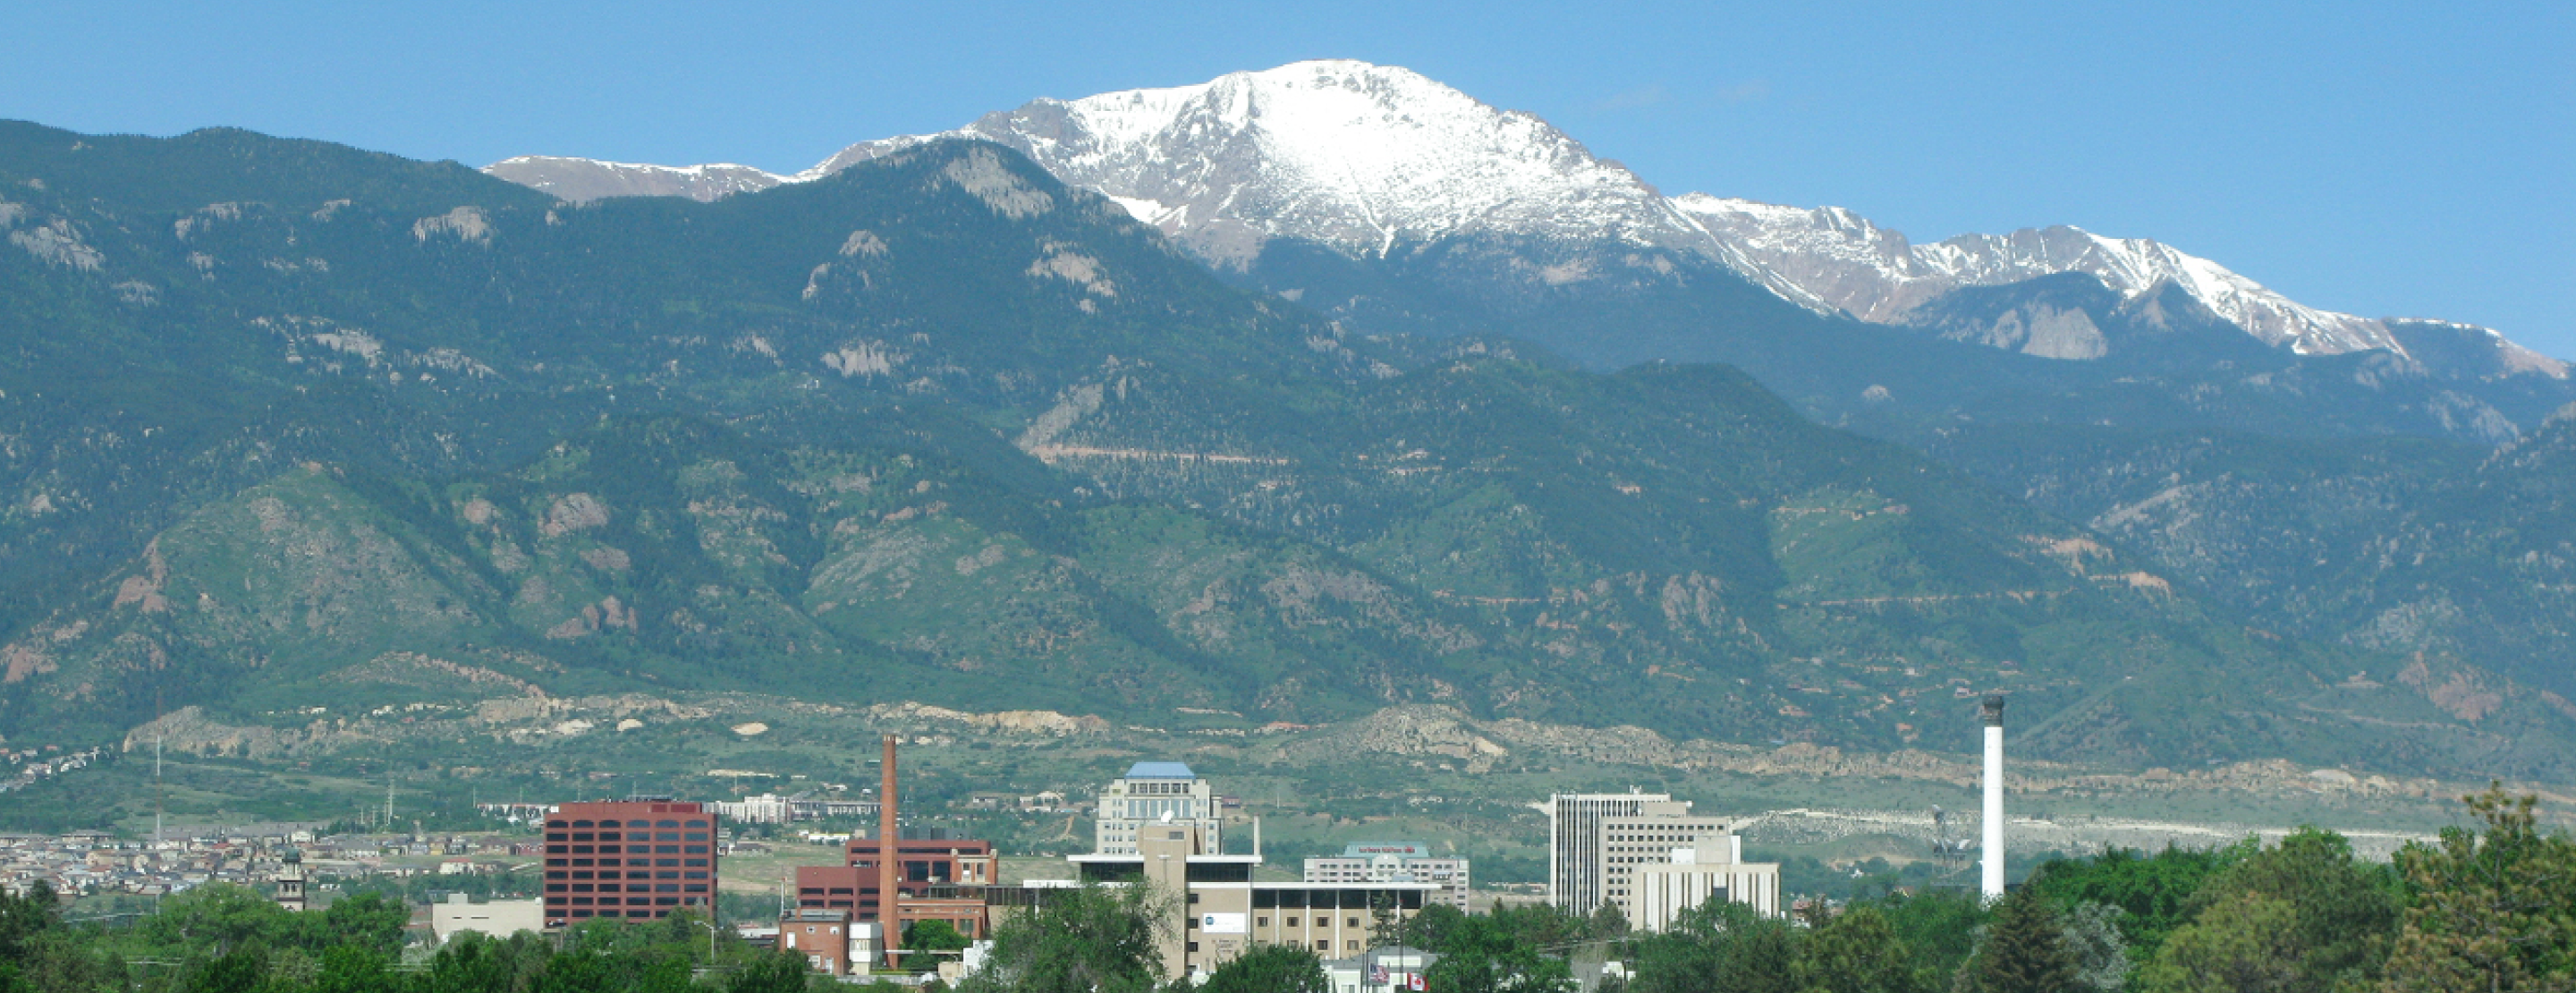 Pikes Peak with the City of Colorado Springs